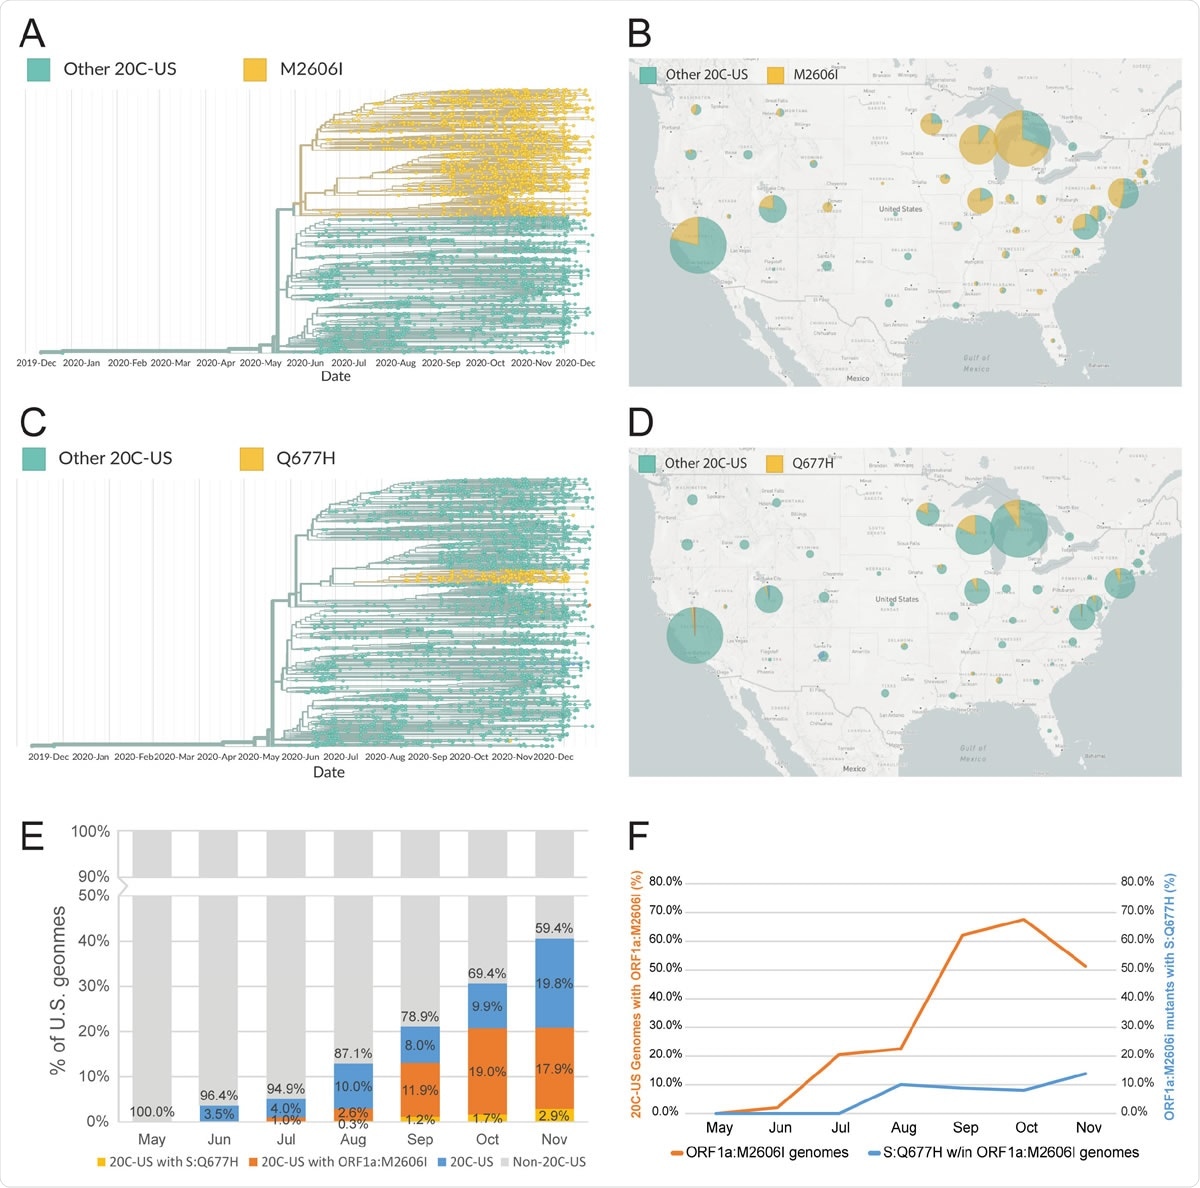 Characterization of recent mutations of the SARS-CoV-2 variant 20C-US. (A-B) Phylogenetic reconstruction and geographic visualization (during the 2-month interval of Nov. 1 to Dec. 31, 2020) of all SARS-CoV-2 variant 20C-US genomes (4683) in the GISAID database (as of Jan. 4, 2021). The ORF1a:M2606I mutant genotype is colored to distinguish it from all other genetic variants within the 20C-US tree. (C-D) Phylogenetic reconstruction and geographic visualization (during the 2-month interval of Nov. 1 to Dec. 31, 2020) for all SARS-CoV-2 variant 20C-US genomes (4683) in the GISAID database (as of Jan. 4, 2021). The S:Q677H mutant genotype is distinguished from all genetic other variants within the 20C-US tree. (E) Plot depicting the rise in percentage of 20C-US, 20C-US possessing ORF1a:M2606I, and 20C-US possessing S:Q677H genomes for all U.S. SARS-CoV-2 genomes in the GISAID database during the indicated months (as of Jan. 4, 2021). (F) Percentage of 20C-US genomes that possess the ORF1a:M2606I mutation or the percentage of ORF1a:M2606I mutants that also possess the S:Q677H mutation versus time.